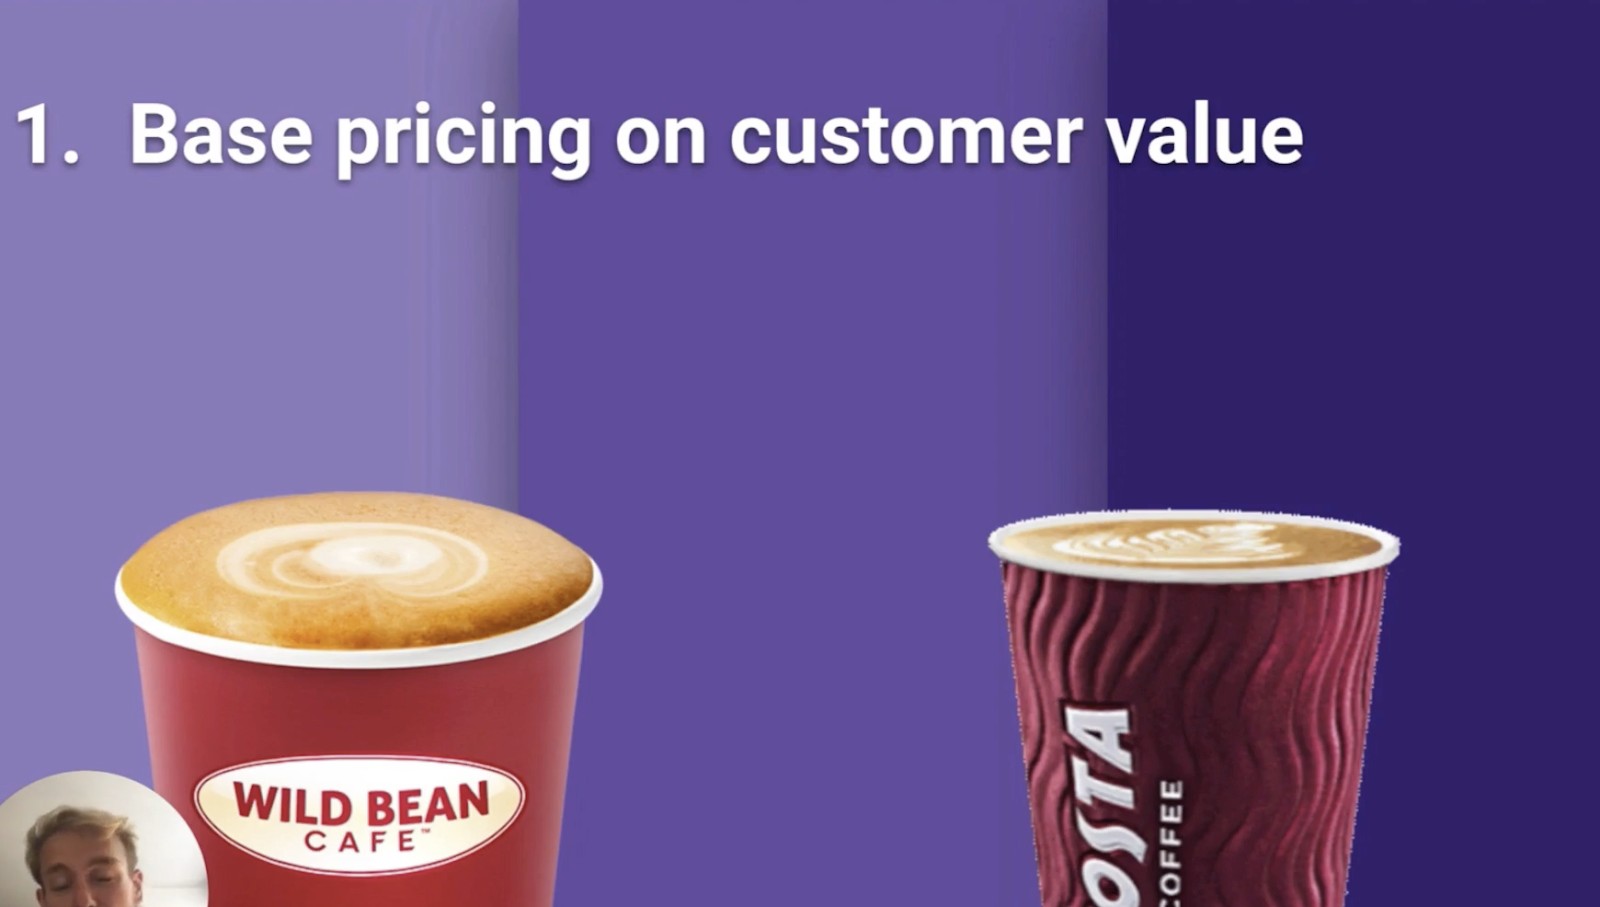 Base pricing on customer value, with coffee used as an example.